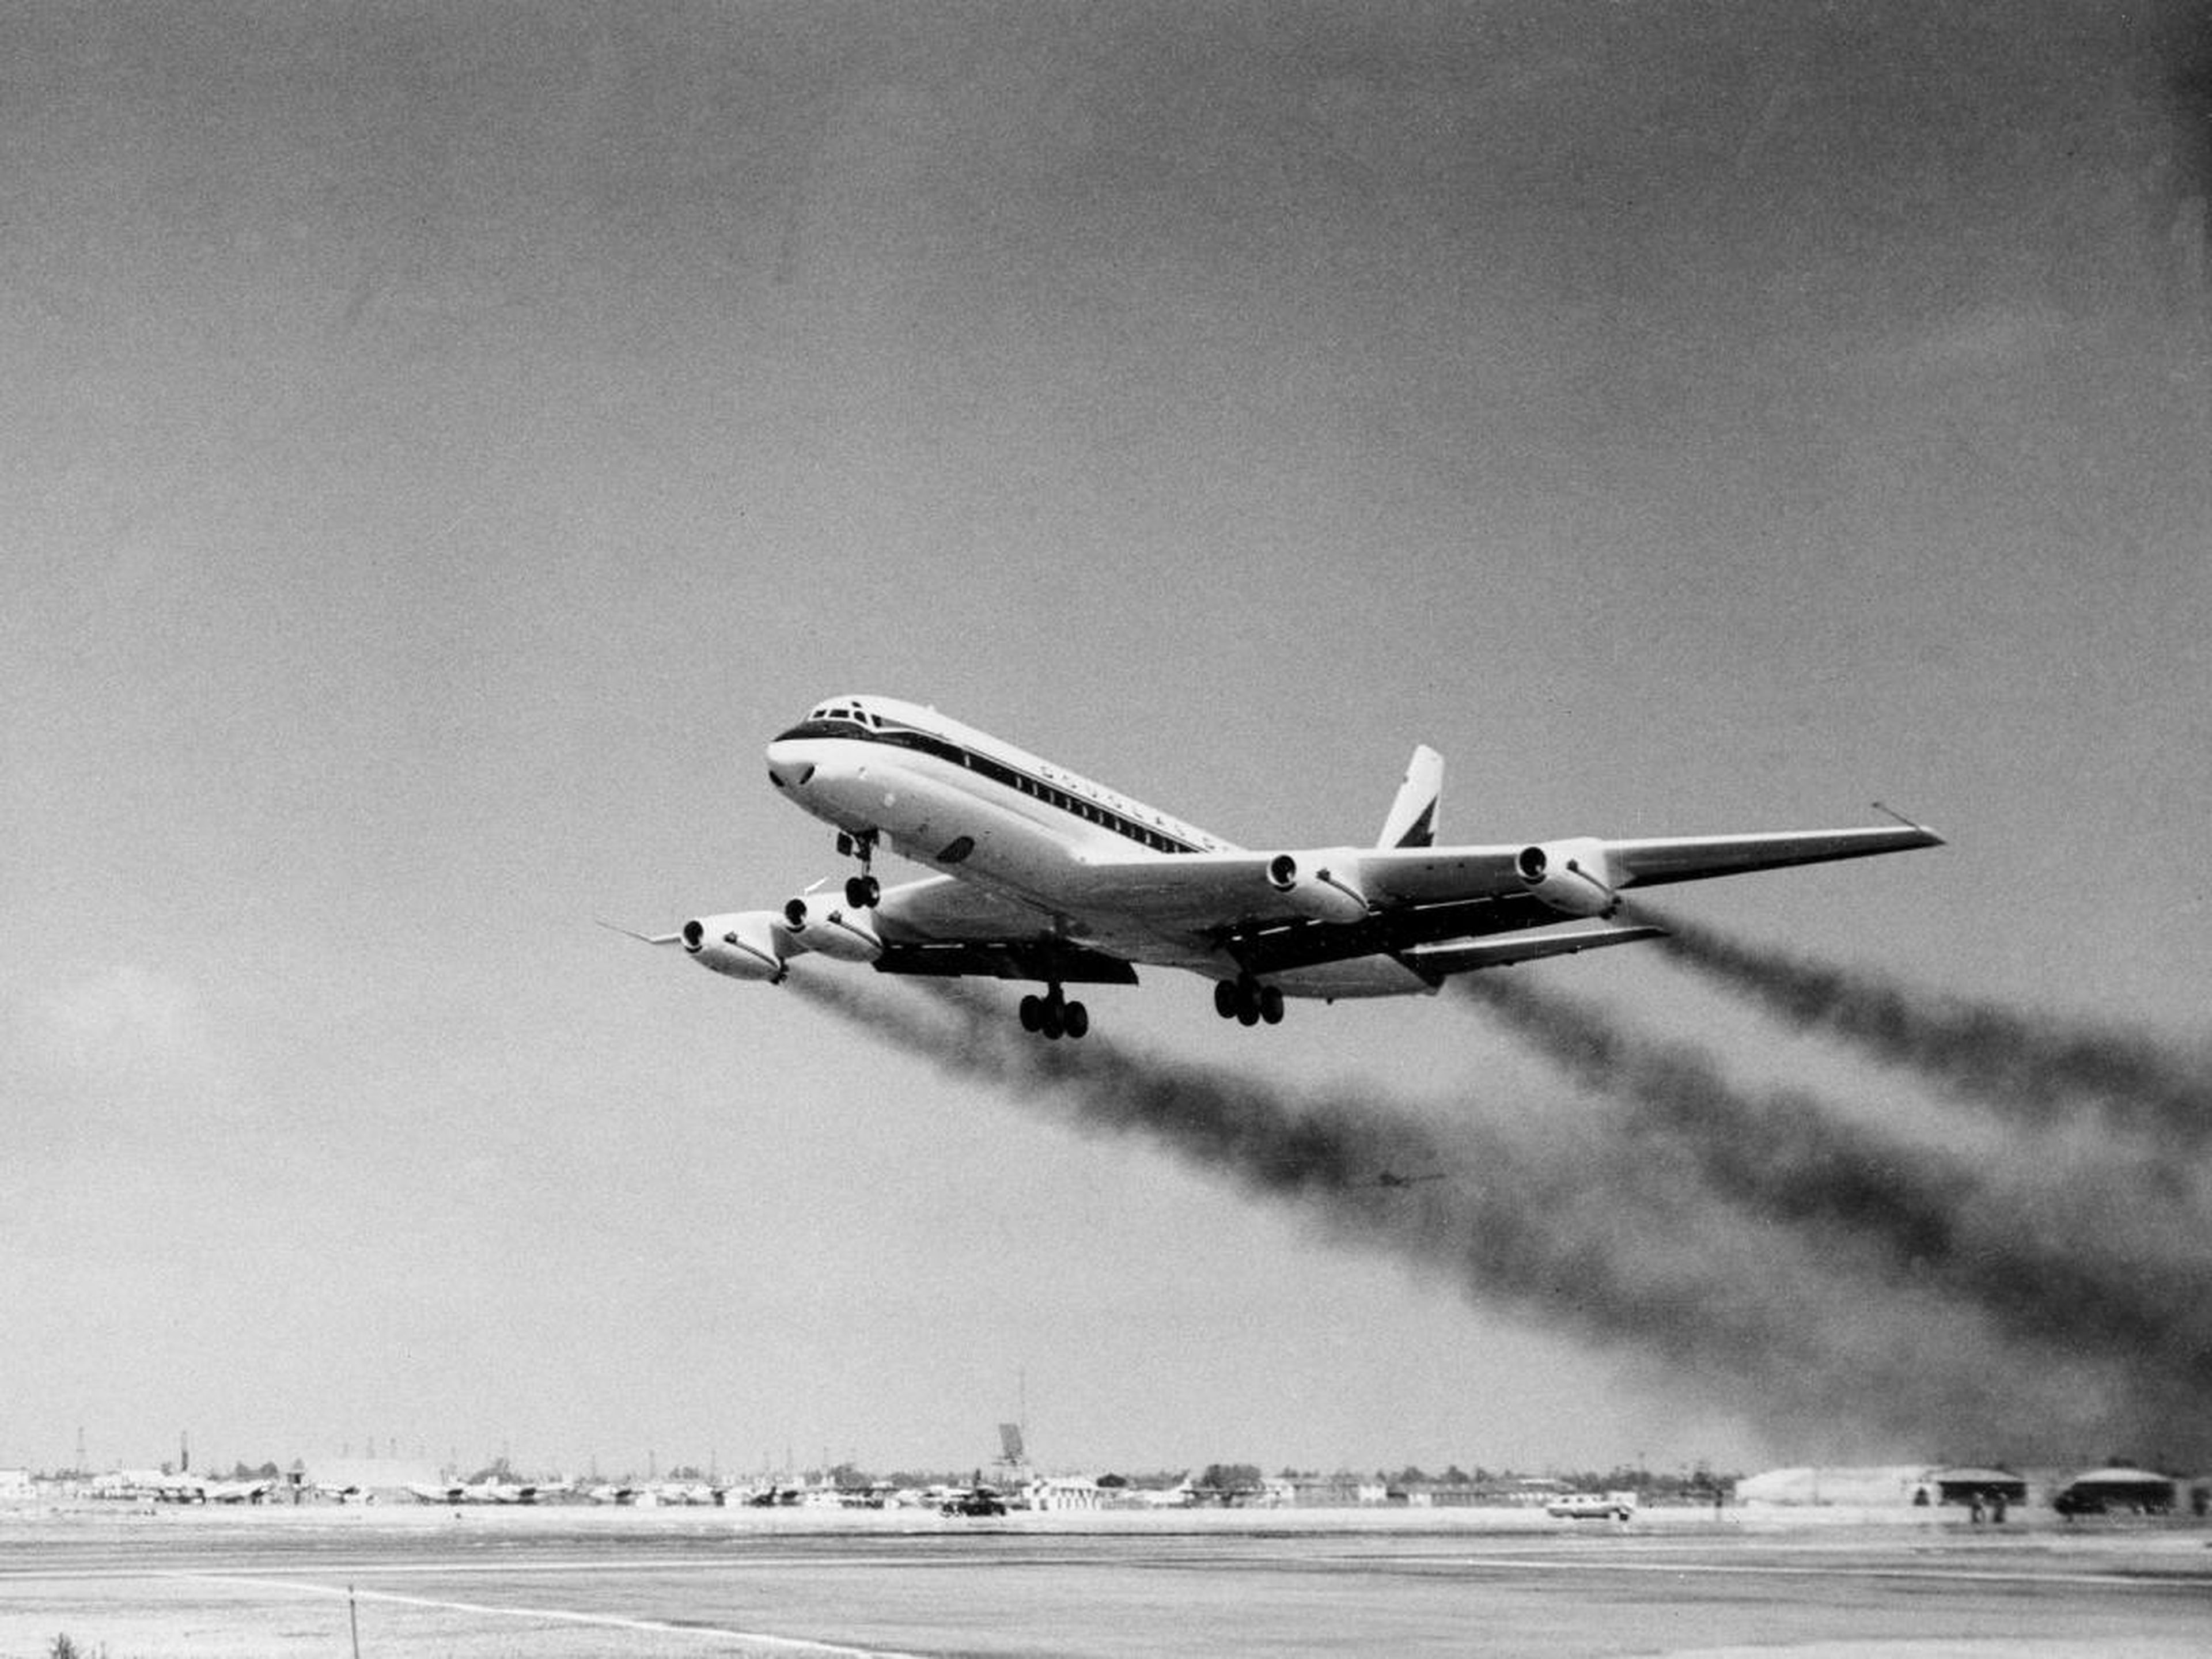 ... the Douglas DC-8 as the jet-powered workhorses of the airline industry. The jetliners of the era, while not quite as refined as today's aircraft, were faster and smoother than their propeller-powered contemporaries.